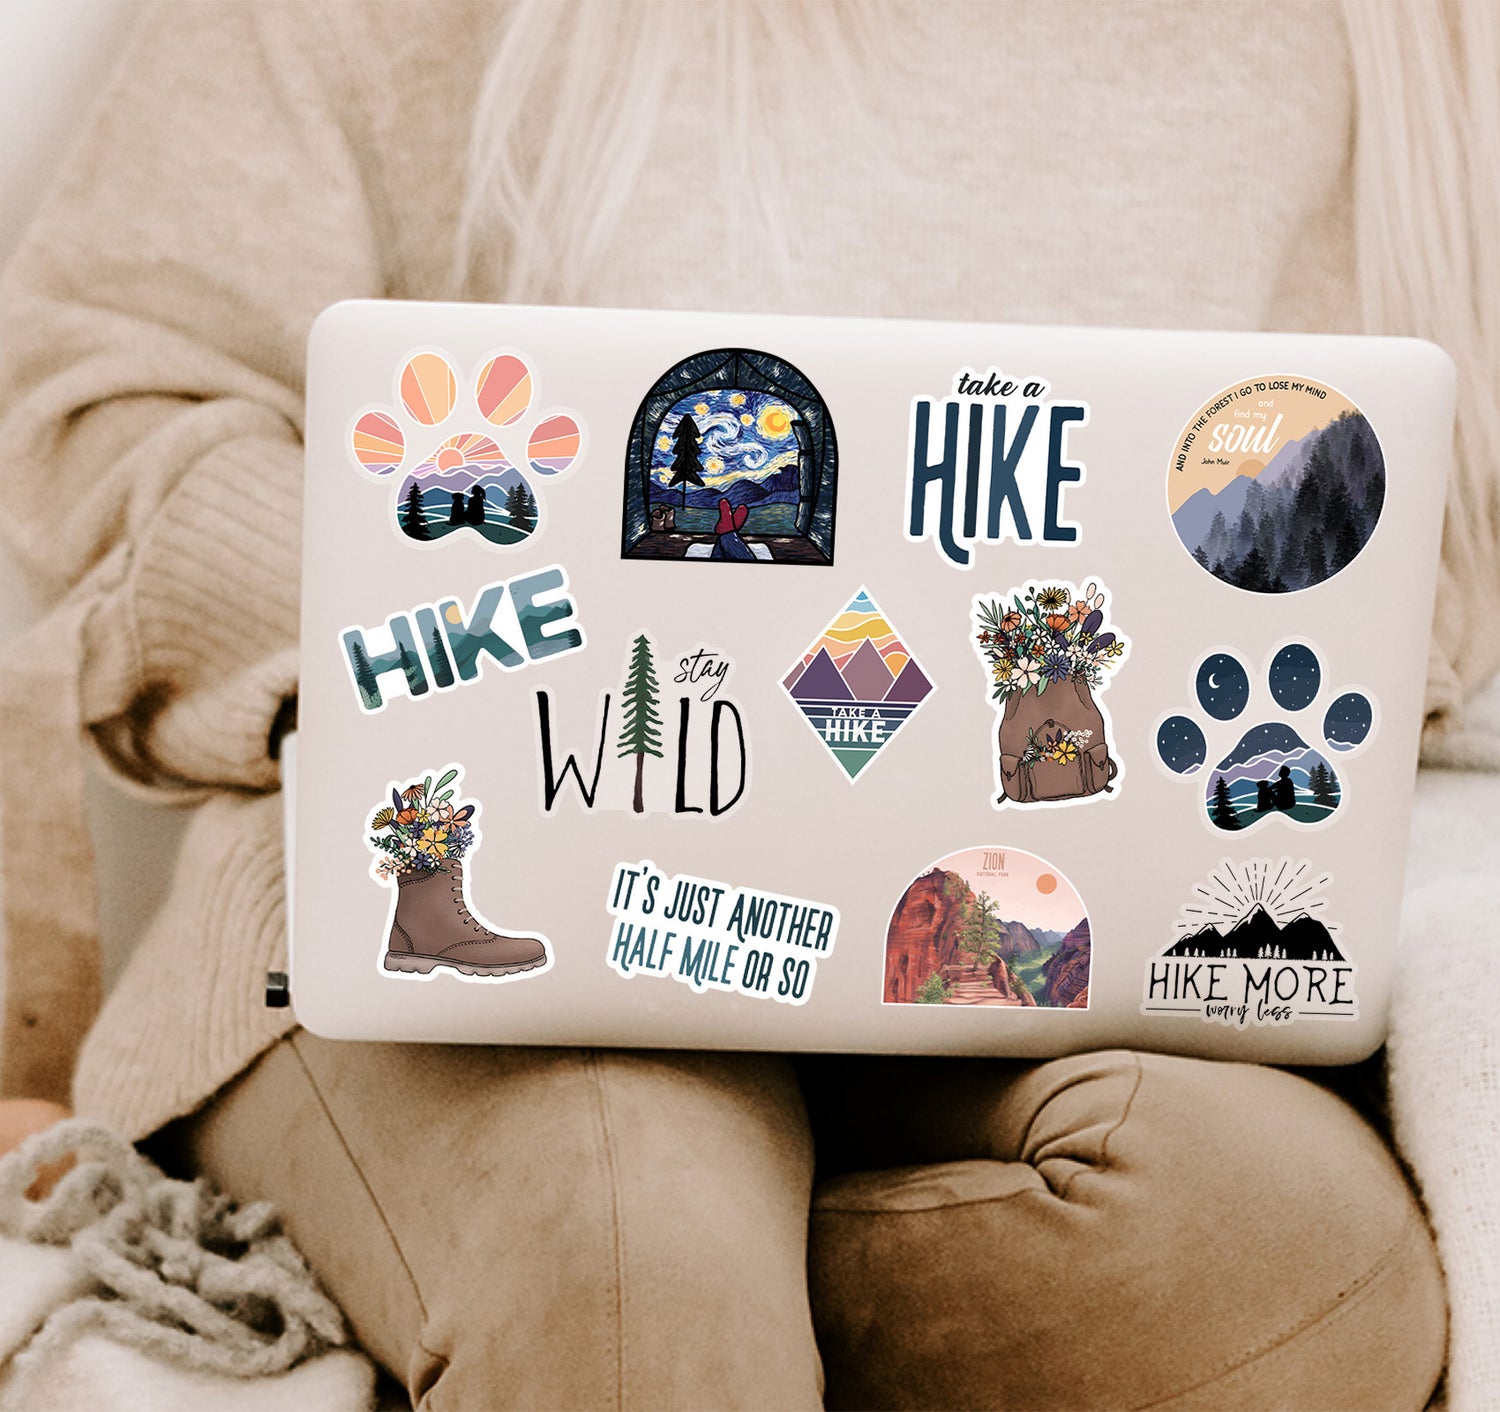 Hiking, camping, and adventure stickers on a laptop cover